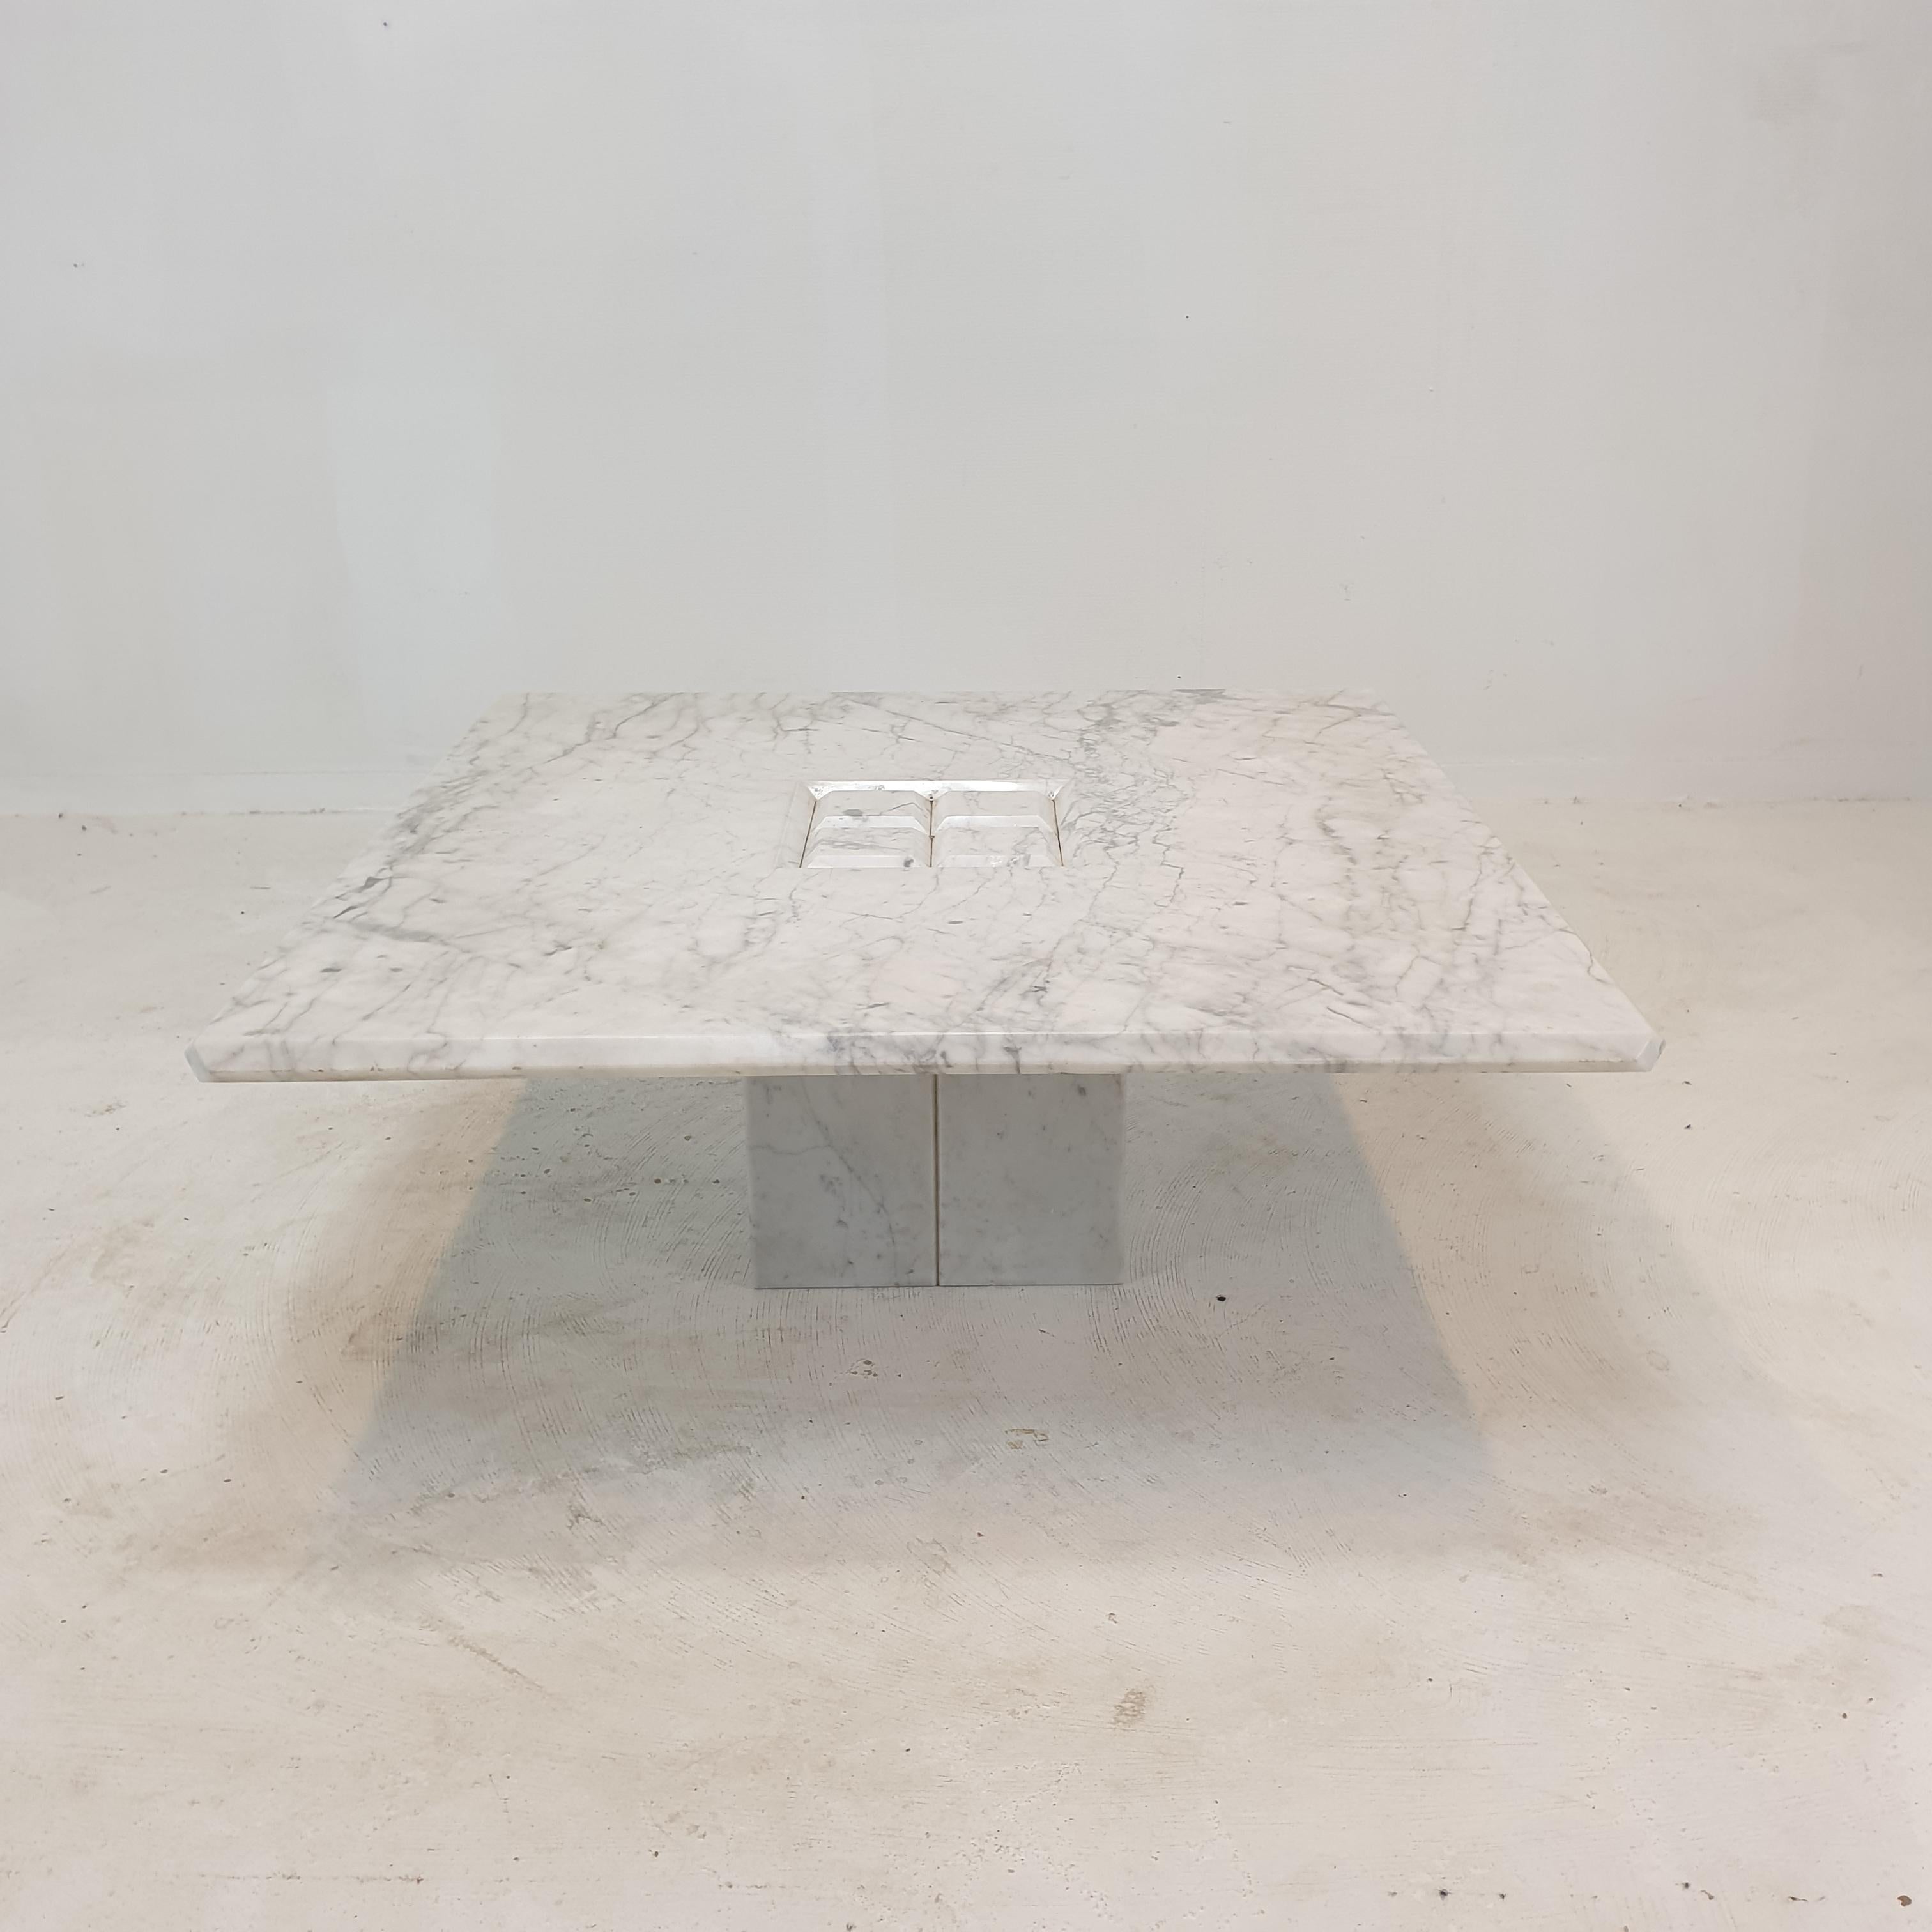 Extraordinary Carrara marble coffee table, fabricated in Italy in the 1990's.
The beautiful square plate and foot are made of solid marble.

The fabulous marble features a beautiful pattern of different colors.

It is in good condition, with